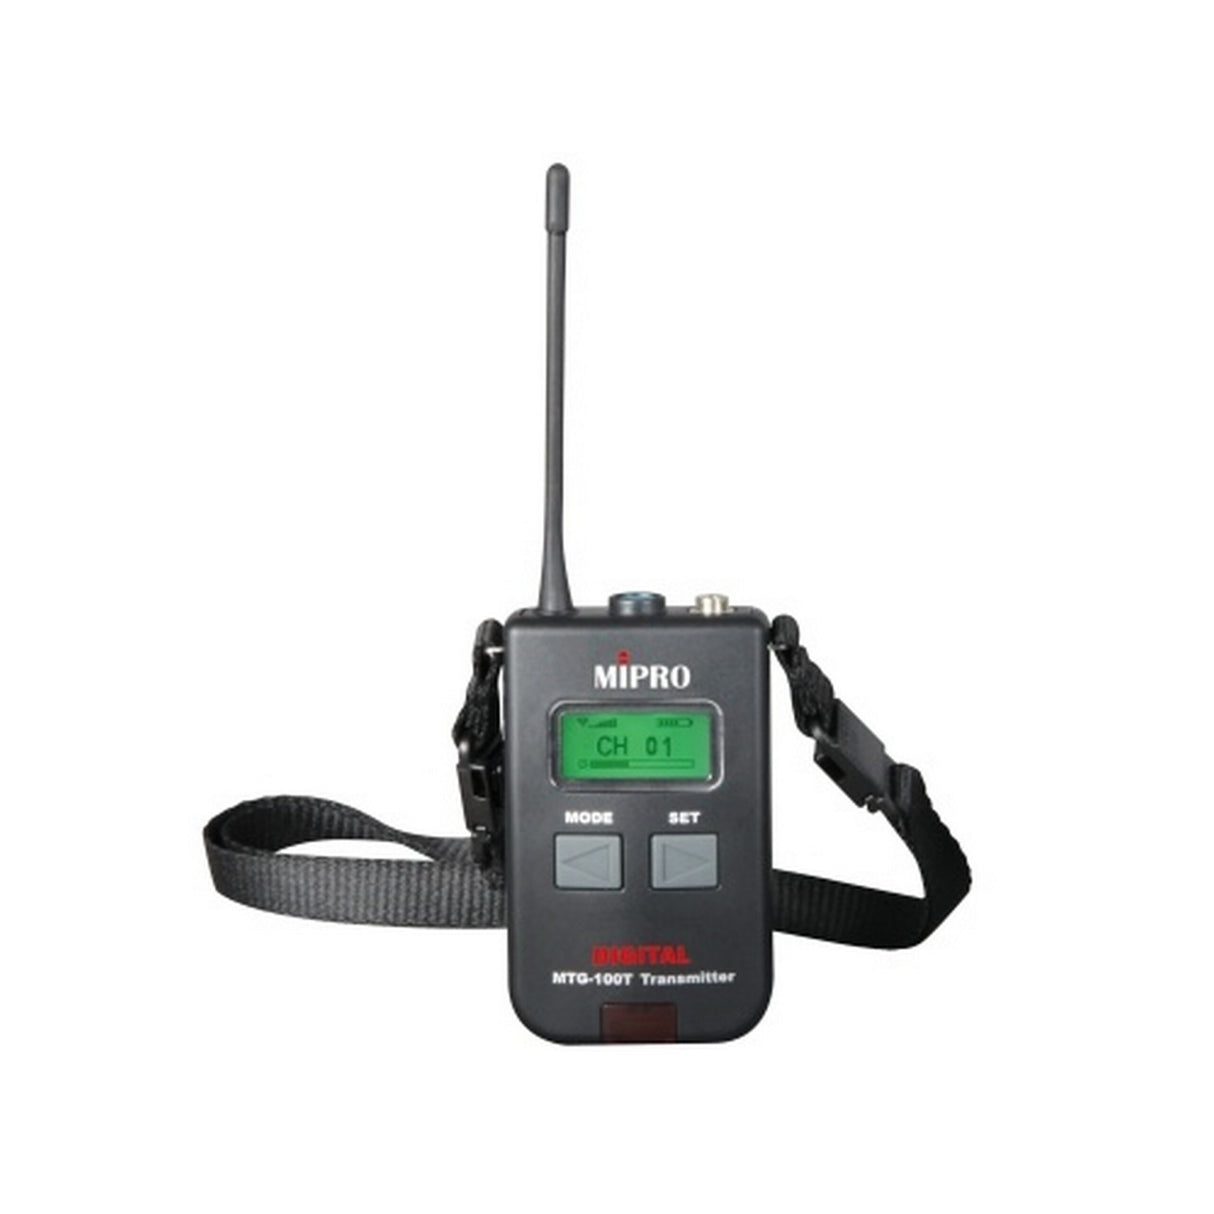 MIPRO MTG-100T Digital Transmitter with Built-In Rechargeable Battery